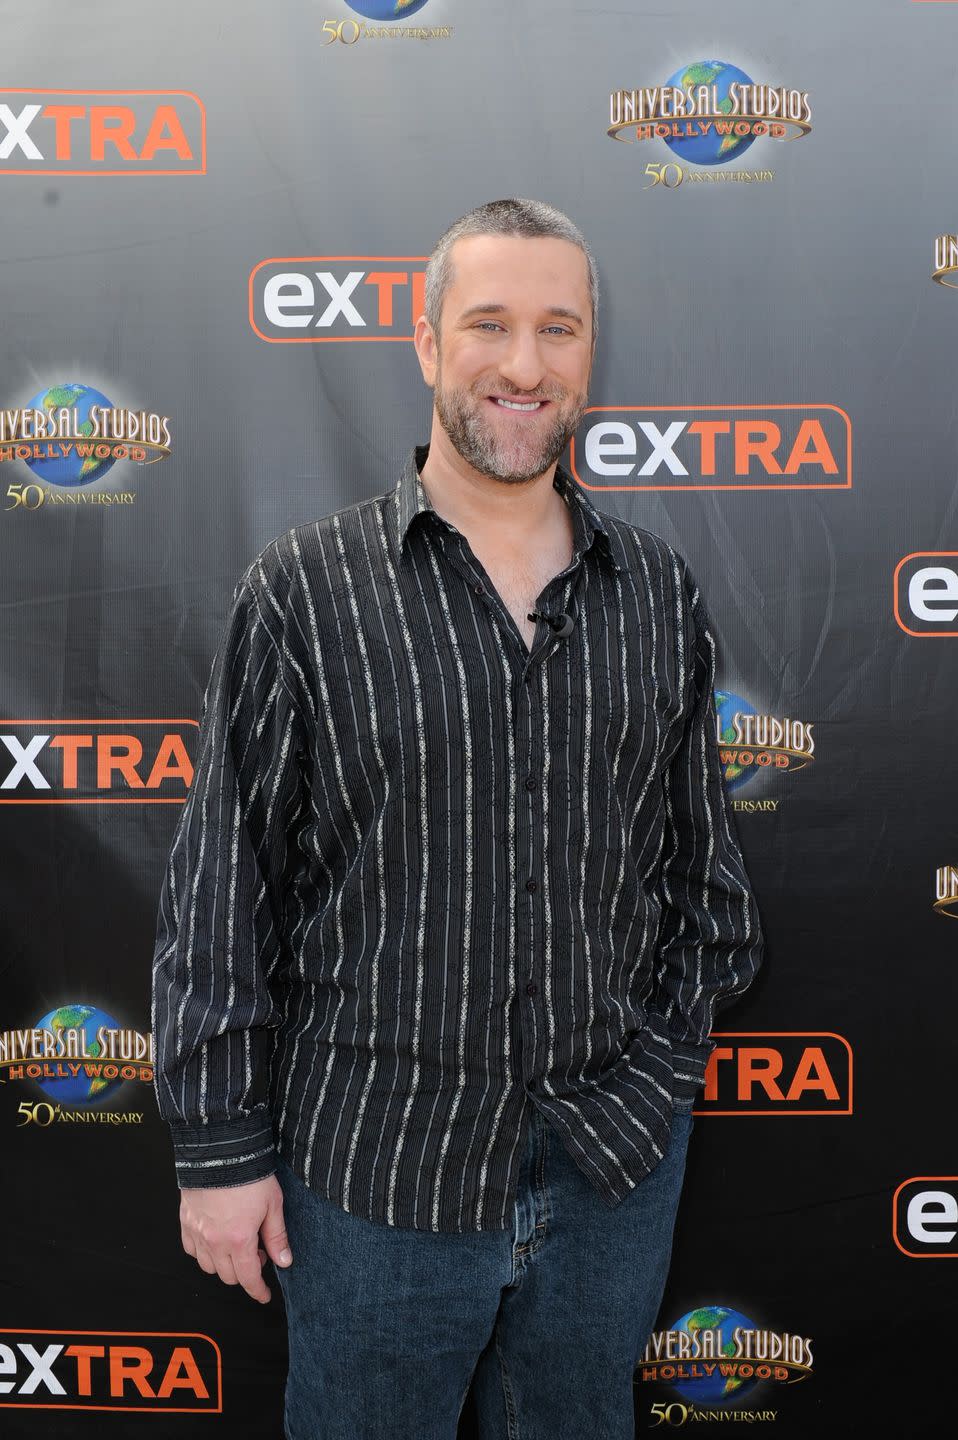 Dustin Diamond - actor who played Screech on Saved by the Bell - died February 1, aged 44